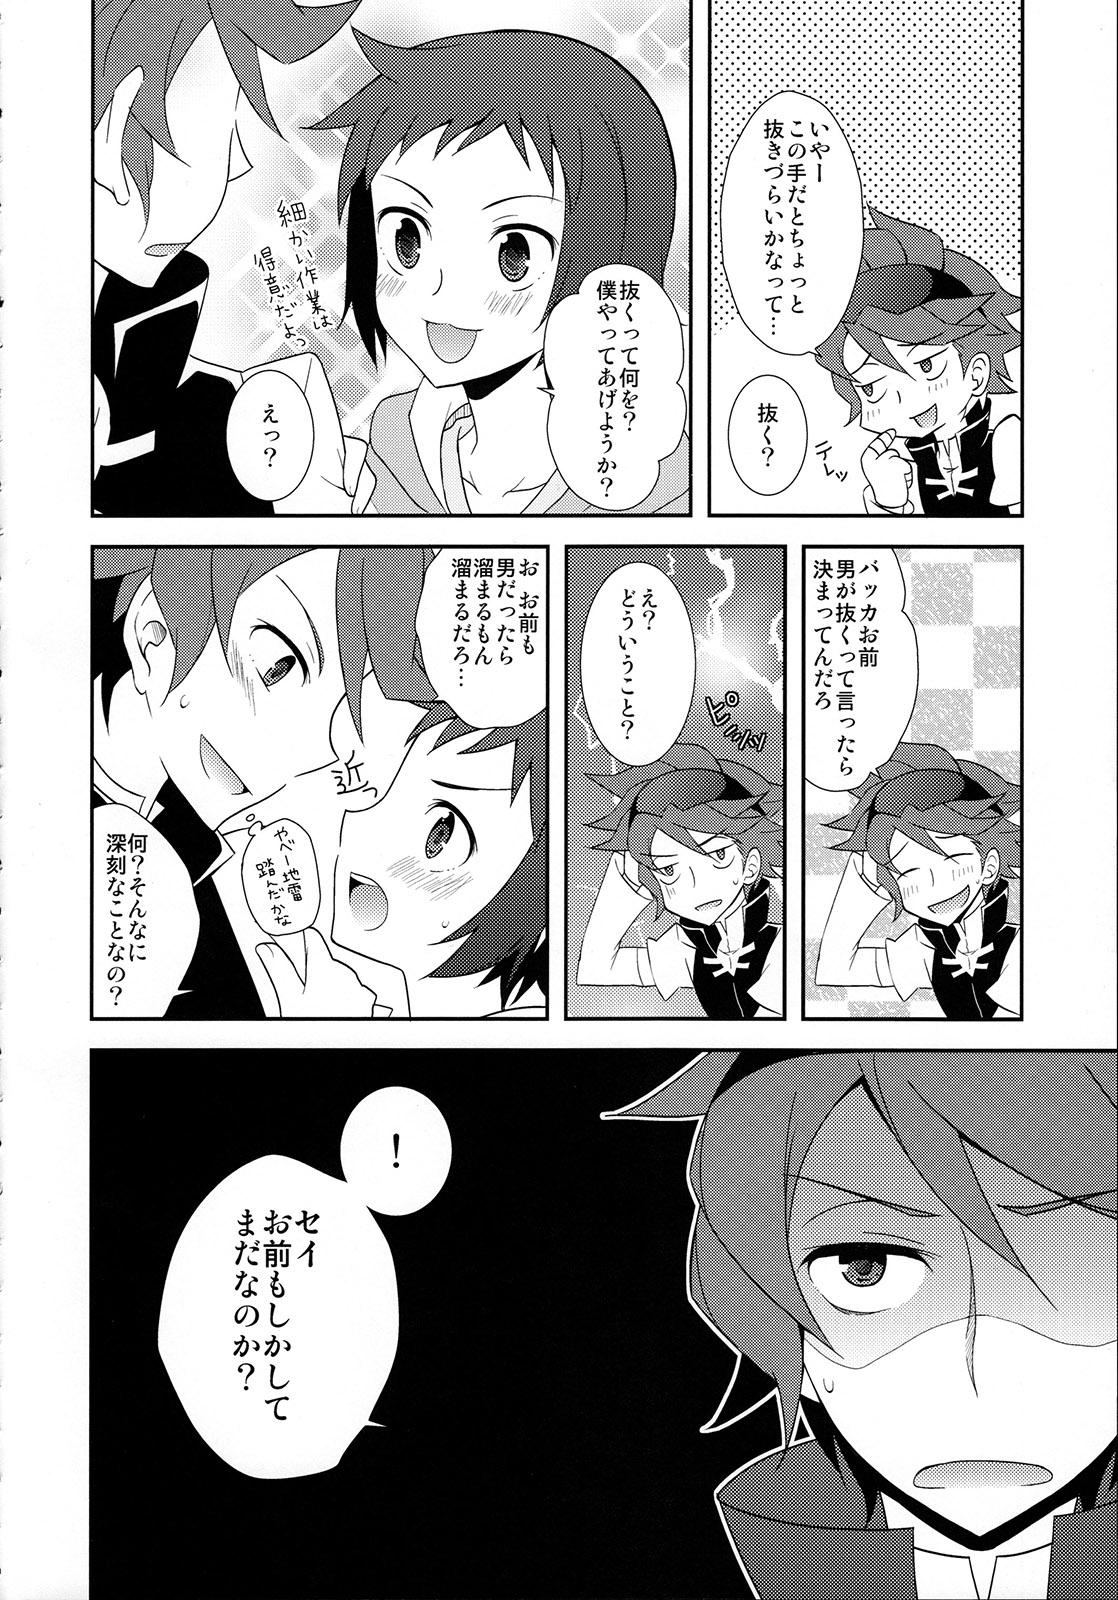 Innocent Maybe★Friendship - Gundam build fighters Ametur Porn - Page 5